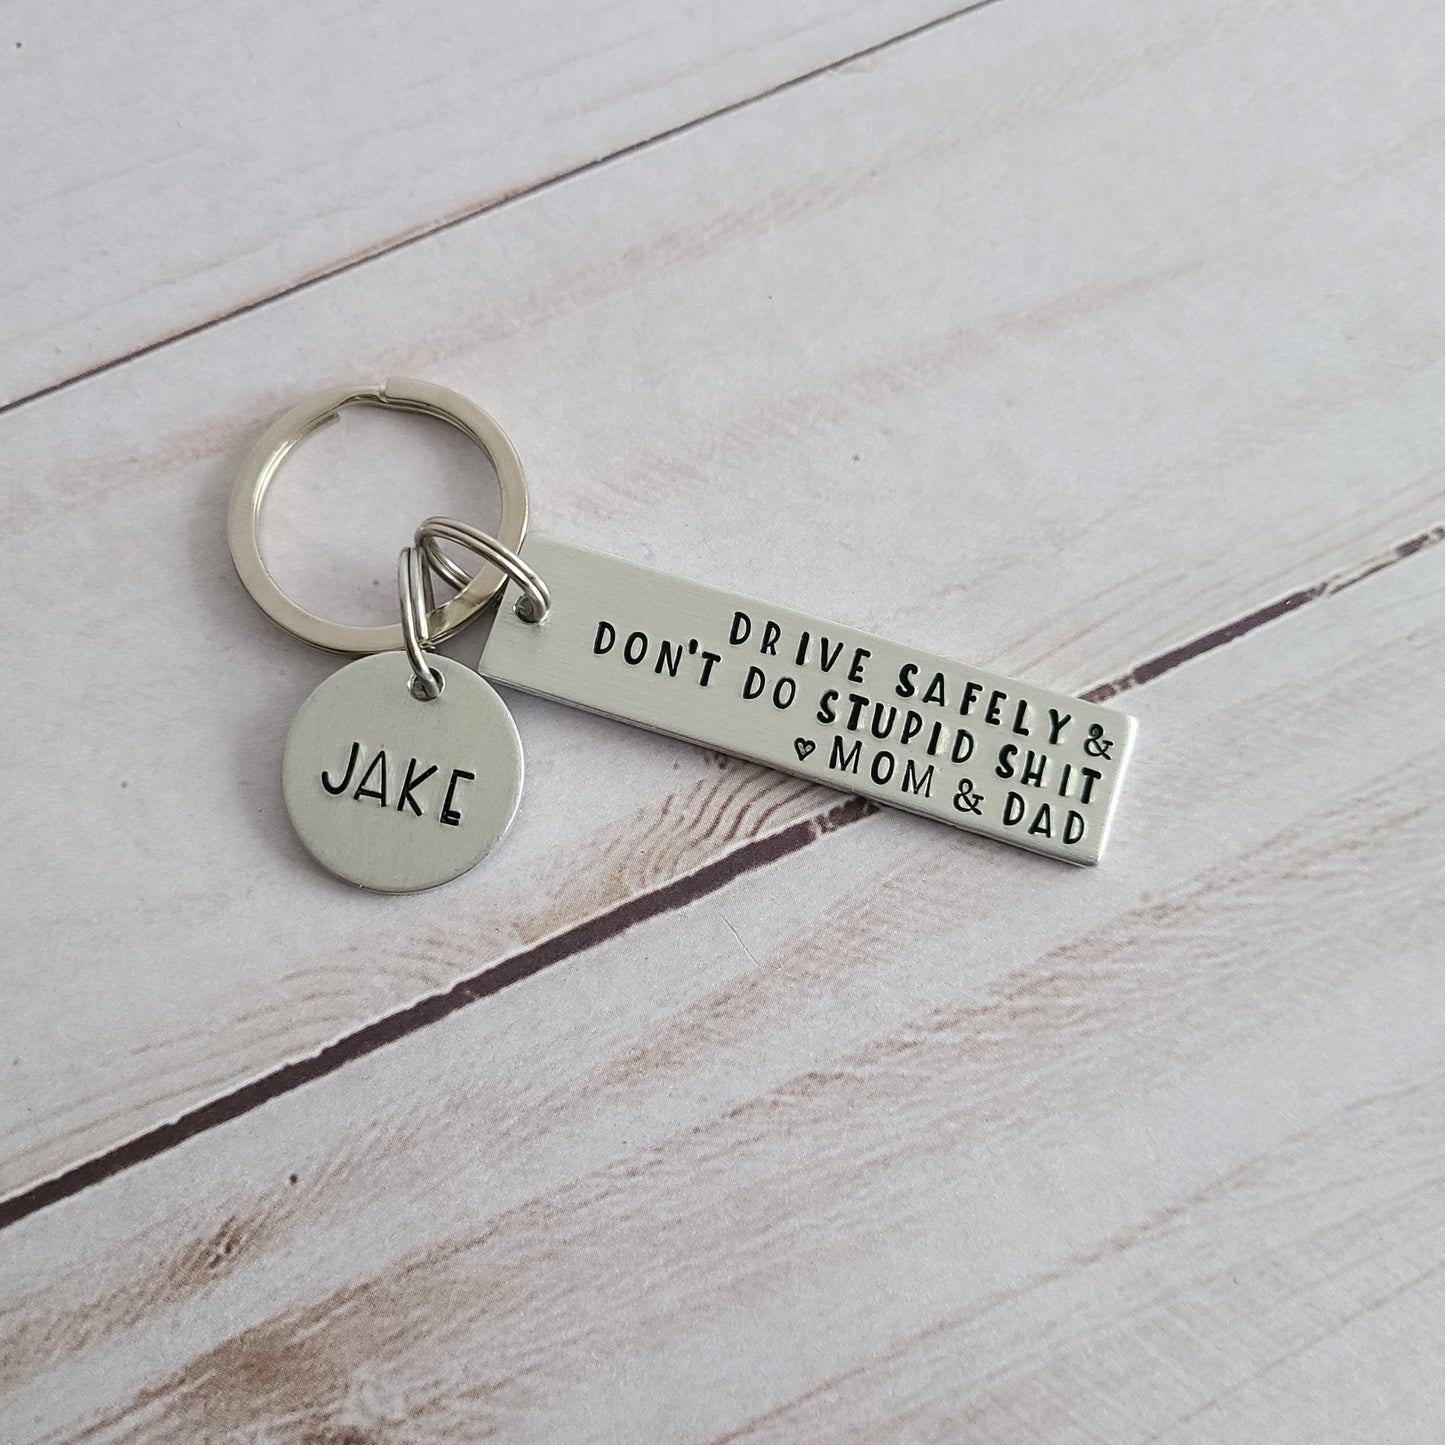 Be Safe Have Fun Don't Do Stupid Shit Love Mom and Dad Keychain